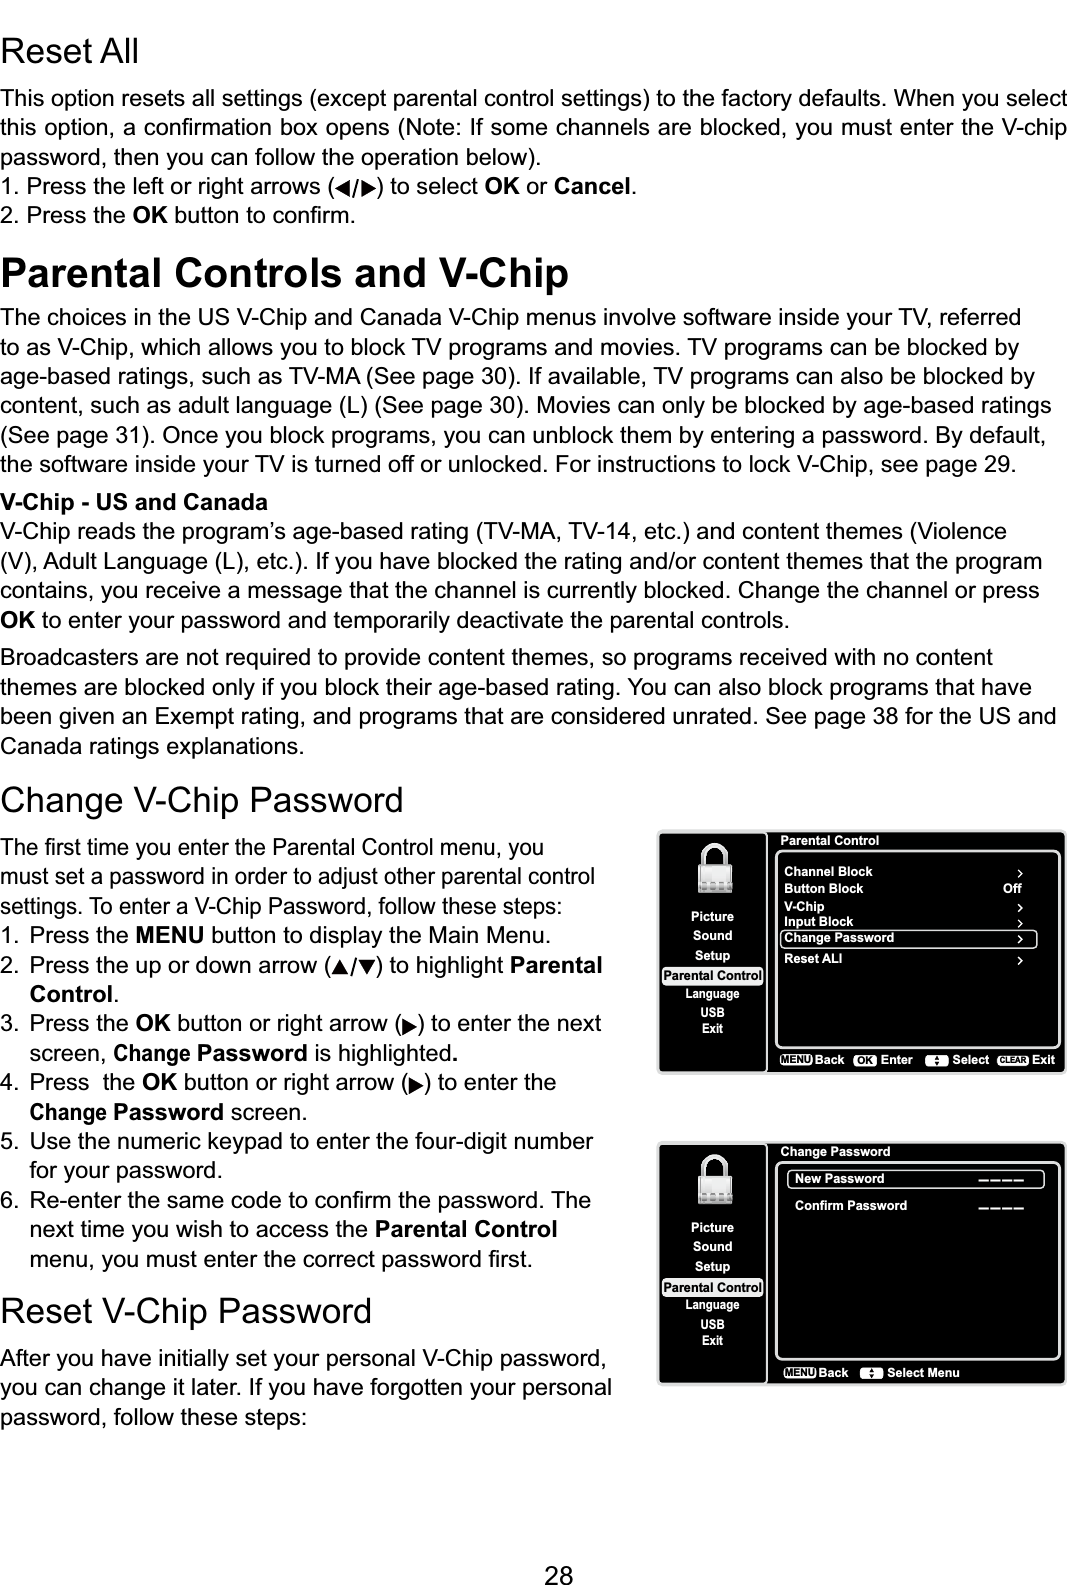 28Parental Controls and V-Chip7KHFKRLFHVLQWKH869&amp;KLSDQG&amp;DQDGD9&amp;KLSPHQXVLQYROYHVRIWZDUHLQVLGH\RXU79UHIHUUHGWRDV9&amp;KLSZKLFKDOORZV\RXWREORFN79SURJUDPVDQGPRYLHV79SURJUDPVFDQEHEORFNHGE\DJHEDVHGUDWLQJVVXFKDV790$6HHSDJH,IDYDLODEOH79SURJUDPVFDQDOVREHEORFNHGE\FRQWHQWVXFKDVDGXOWODQJXDJH/6HHSDJH0RYLHVFDQRQO\EHEORFNHGE\DJHEDVHGUDWLQJV6HHSDJH2QFH\RXEORFNSURJUDPV\RXFDQXQEORFNWKHPE\HQWHULQJDSDVVZRUG%\GHIDXOWWKHVRIWZDUHLQVLGH\RXU79LVWXUQHGRIIRUXQORFNHG)RULQVWUXFWLRQVWRORFN9&amp;KLSVHHSDJHV-Chip - US and Canada9&amp;KLSUHDGVWKHSURJUDP¶VDJHEDVHGUDWLQJ790$79HWFDQGFRQWHQWWKHPHV9LROHQFH9$GXOW/DQJXDJH/HWF,I\RXKDYHEORFNHGWKHUDWLQJDQGRUFRQWHQWWKHPHVWKDWWKHSURJUDPFRQWDLQV\RXUHFHLYHDPHVVDJHWKDWWKHFKDQQHOLVFXUUHQWO\EORFNHG&amp;KDQJHWKHFKDQQHORUSUHVVOK to enter your password and temporarily deactivate the parental controls.Broadcasters are not required to provide content themes, so programs received with no content WKHPHVDUHEORFNHGRQO\LI\RXEORFNWKHLUDJHEDVHGUDWLQJ&lt;RXFDQDOVREORFNSURJUDPVWKDWKDYHbeen given an Exempt rating, and programs that are considered unrated. See page 38 for the US and Canada ratings explanations.Reset All This option resets all settings (except parental control settings) to the factory defaults. When you select WKLVRSWLRQDFRQ¿UPDWLRQER[RSHQV1RWH,IVRPHFKDQQHOVDUHEORFNHG\RXPXVWHQWHUWKH9FKLSpassword, then you can follow the operation below).1. Press the left or right arrows ( ) to select OK or Cancel.2. Press the OKEXWWRQWRFRQ¿UP&amp;KDQJH9&amp;KLS3DVVZRUG7KH¿UVWWLPH\RXHQWHUWKH3DUHQWDO&amp;RQWUROPHQX\RXmust set a password in order to adjust other parental control VHWWLQJV7RHQWHUD9&amp;KLS3DVVZRUGIROORZWKHVHVWHSV1. Press the MENU button to display the Main Menu.2. Press the up or down arrow ( ) to highlight Parental Control.3. Press the OK button or right arrow ( ) to enter the next screen,ChangePassword is highlighted.4. Press  the OK button or right arrow ( ) to enter the ChangePassword screen. 8VHWKHQXPHULFNH\SDGWRHQWHUWKHIRXUGLJLWQXPEHUfor your password. 5HHQWHUWKHVDPHFRGHWRFRQ¿UPWKHSDVVZRUG7KHnext time you wish to access the Parental Control PHQX\RXPXVWHQWHUWKHFRUUHFWSDVVZRUG¿UVW5HVHW9&amp;KLS3DVVZRUG$IWHU\RXKDYHLQLWLDOO\VHW\RXUSHUVRQDO9&amp;KLSSDVVZRUGyou can change it later. If you have forgotten your personal password, follow these steps:SetupParental ControlLanguageSoundPictureUSBExitChange PasswordNew Password--------Confirm PasswordBackMENU Select MenuParental ControlChannel BlockButton BlockSetupParental ControlLanguageSoundPictureUSBExitV-ChipInput BlockChange PasswordOffBackMENU Enter Select ExitCLEAROKReset ALl